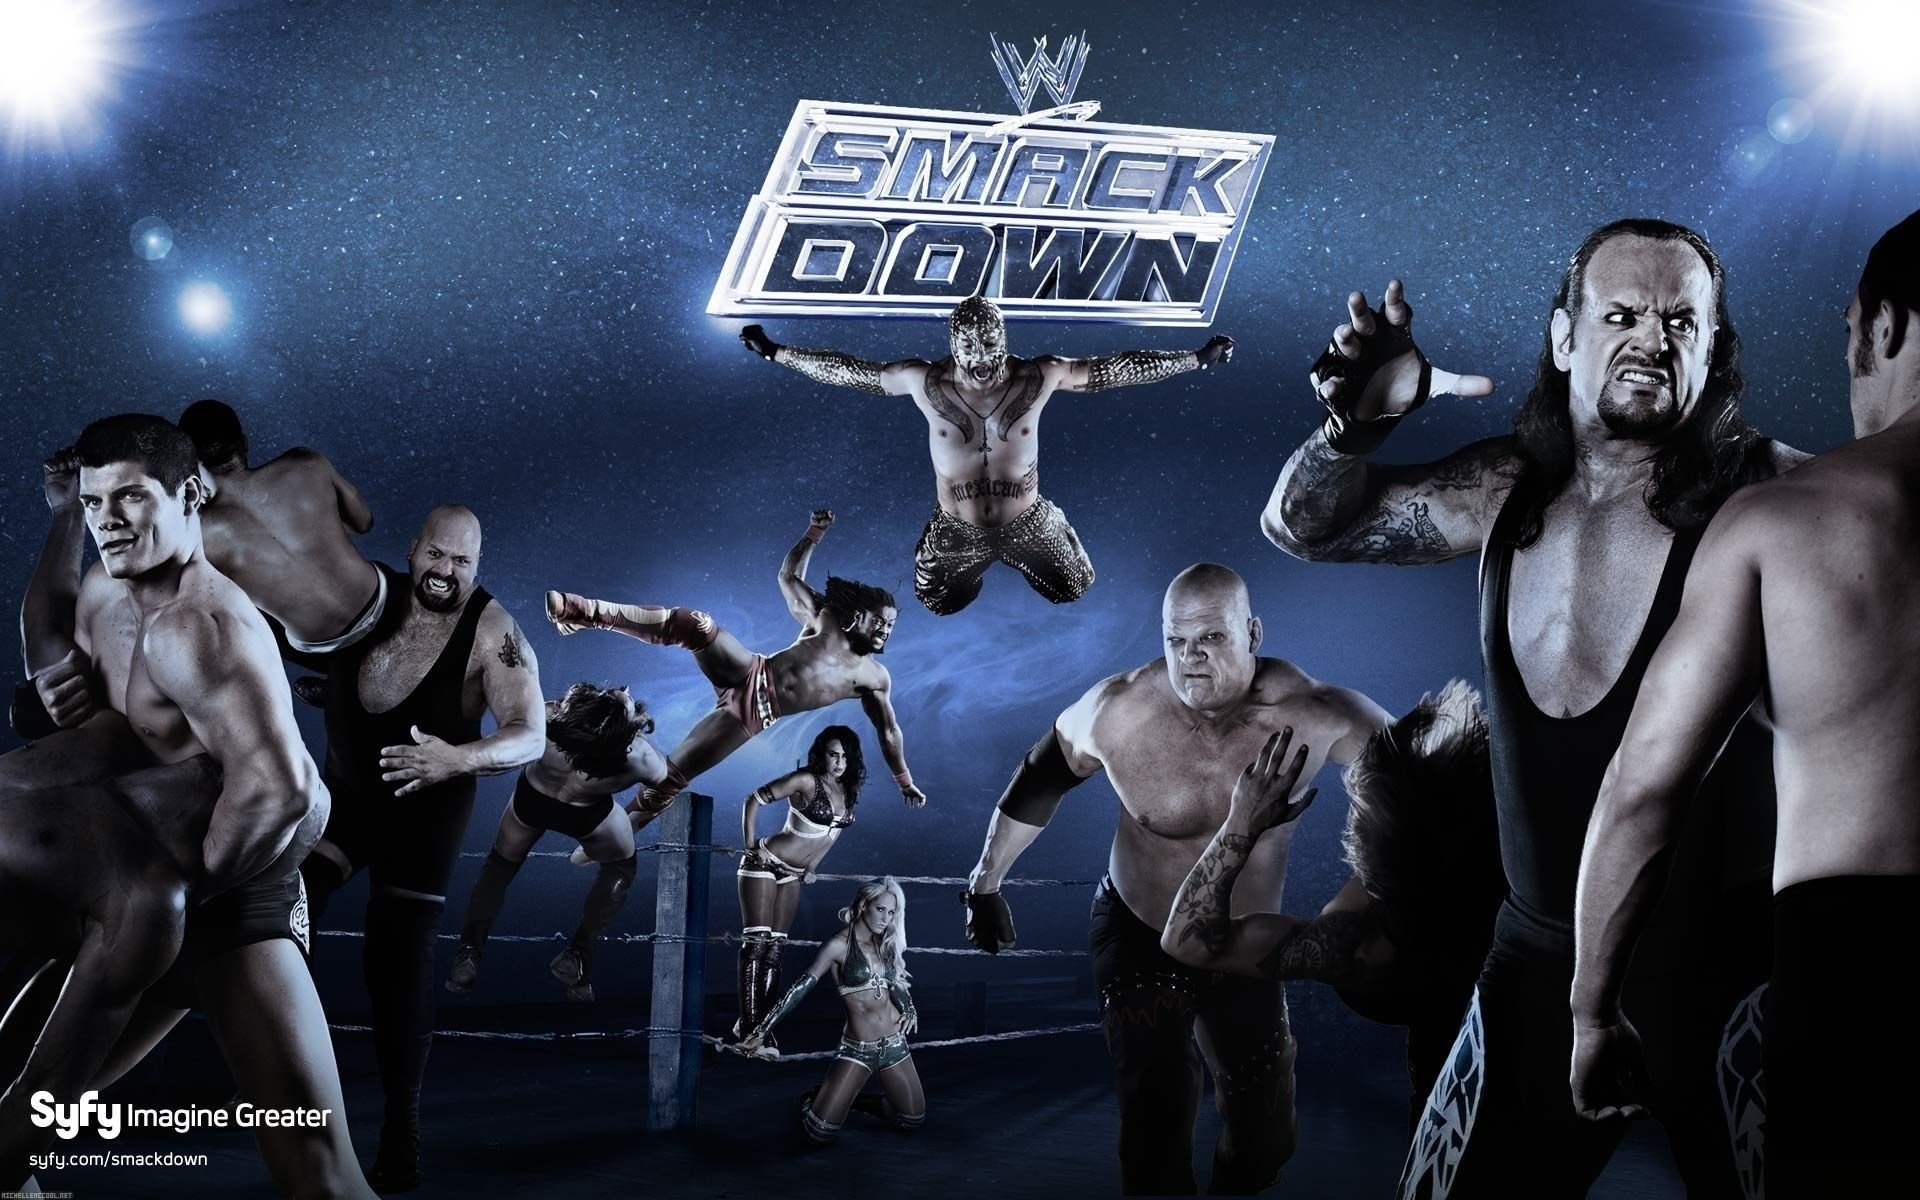 WWE SmackDown, Smack down wallpapers, Background pictures, Wrestling, 1920x1200 HD Desktop